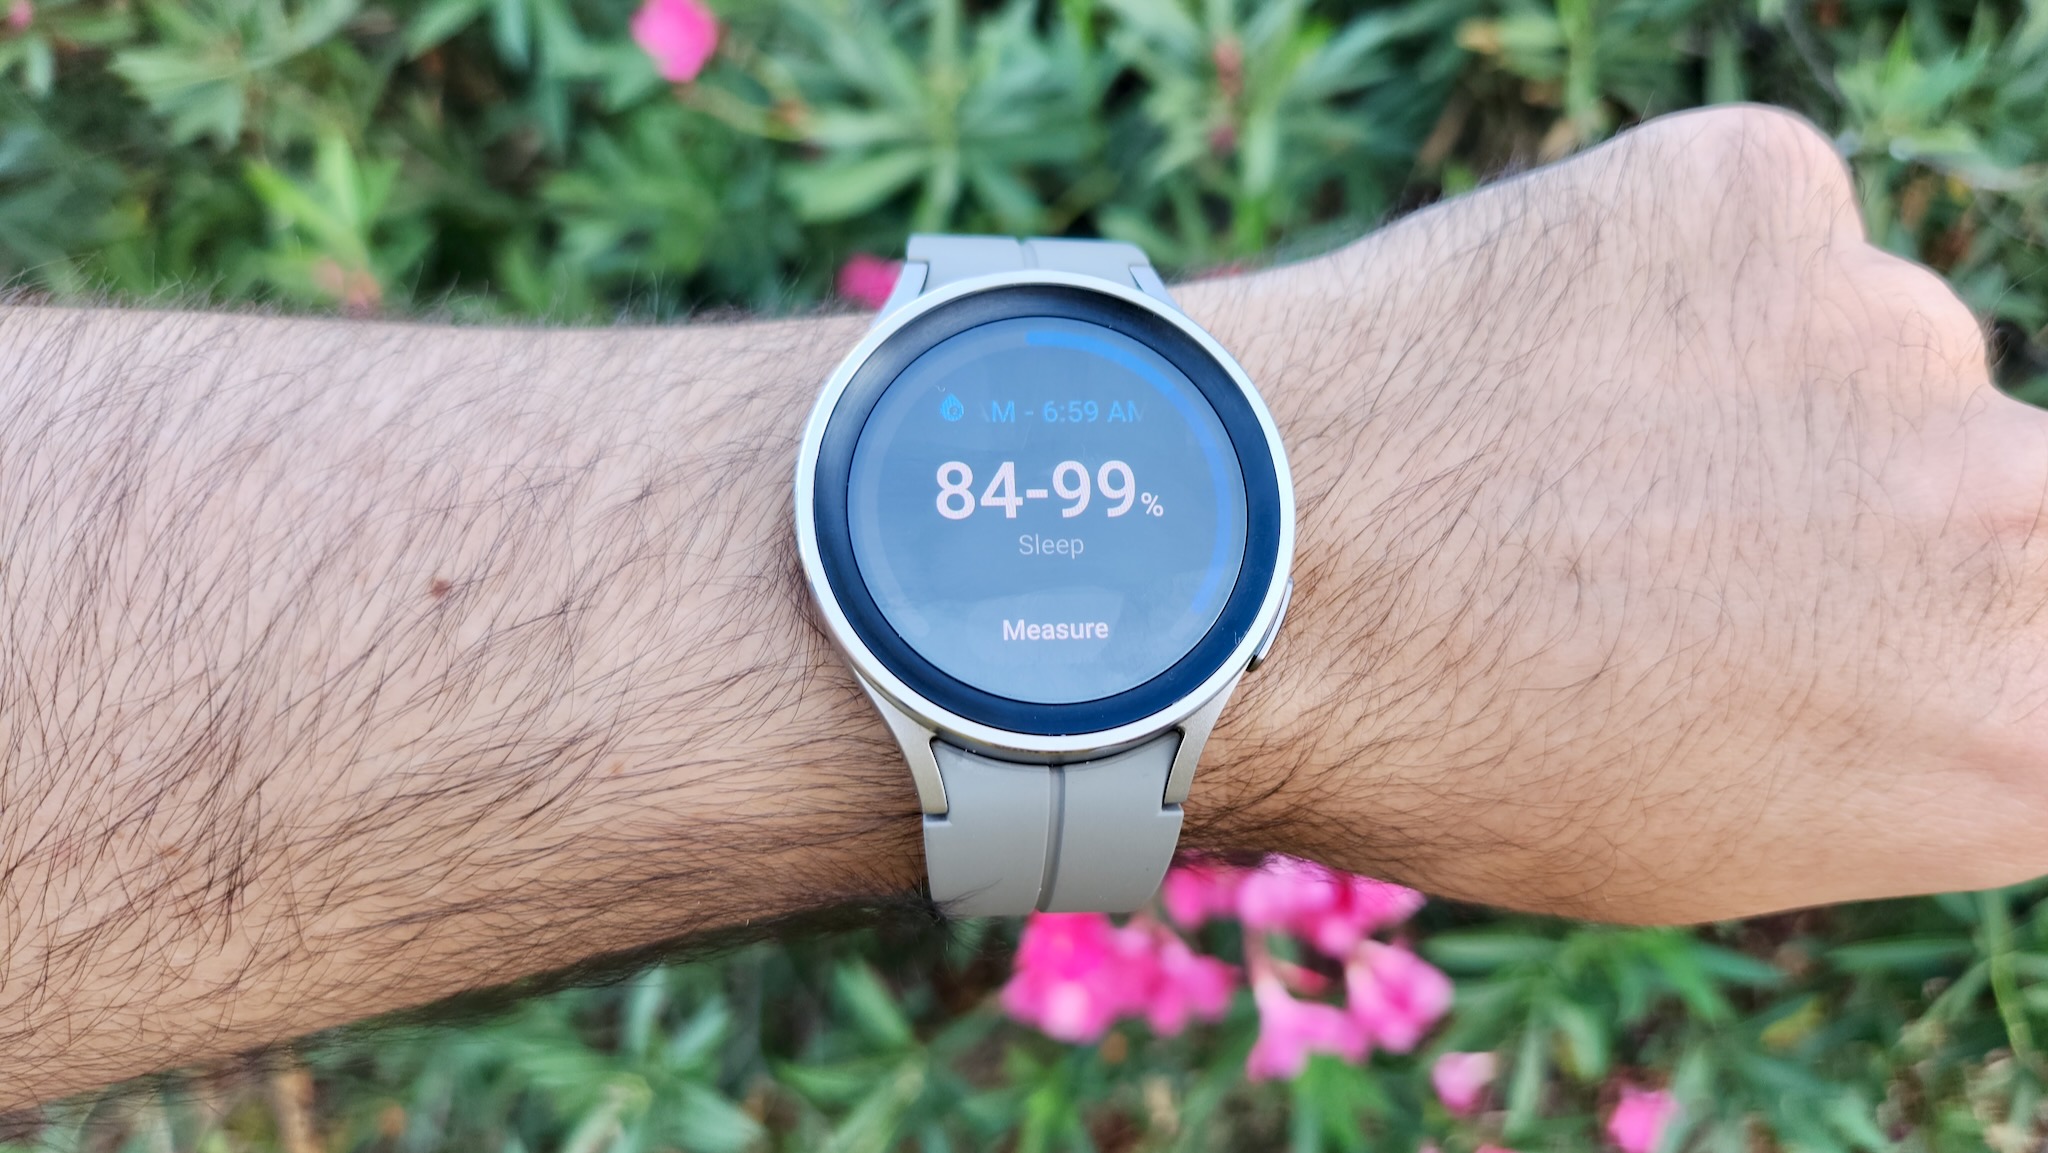 Samsung Galaxy Watch 5 Pro sleep tracking results showing range of blood oxygen levels